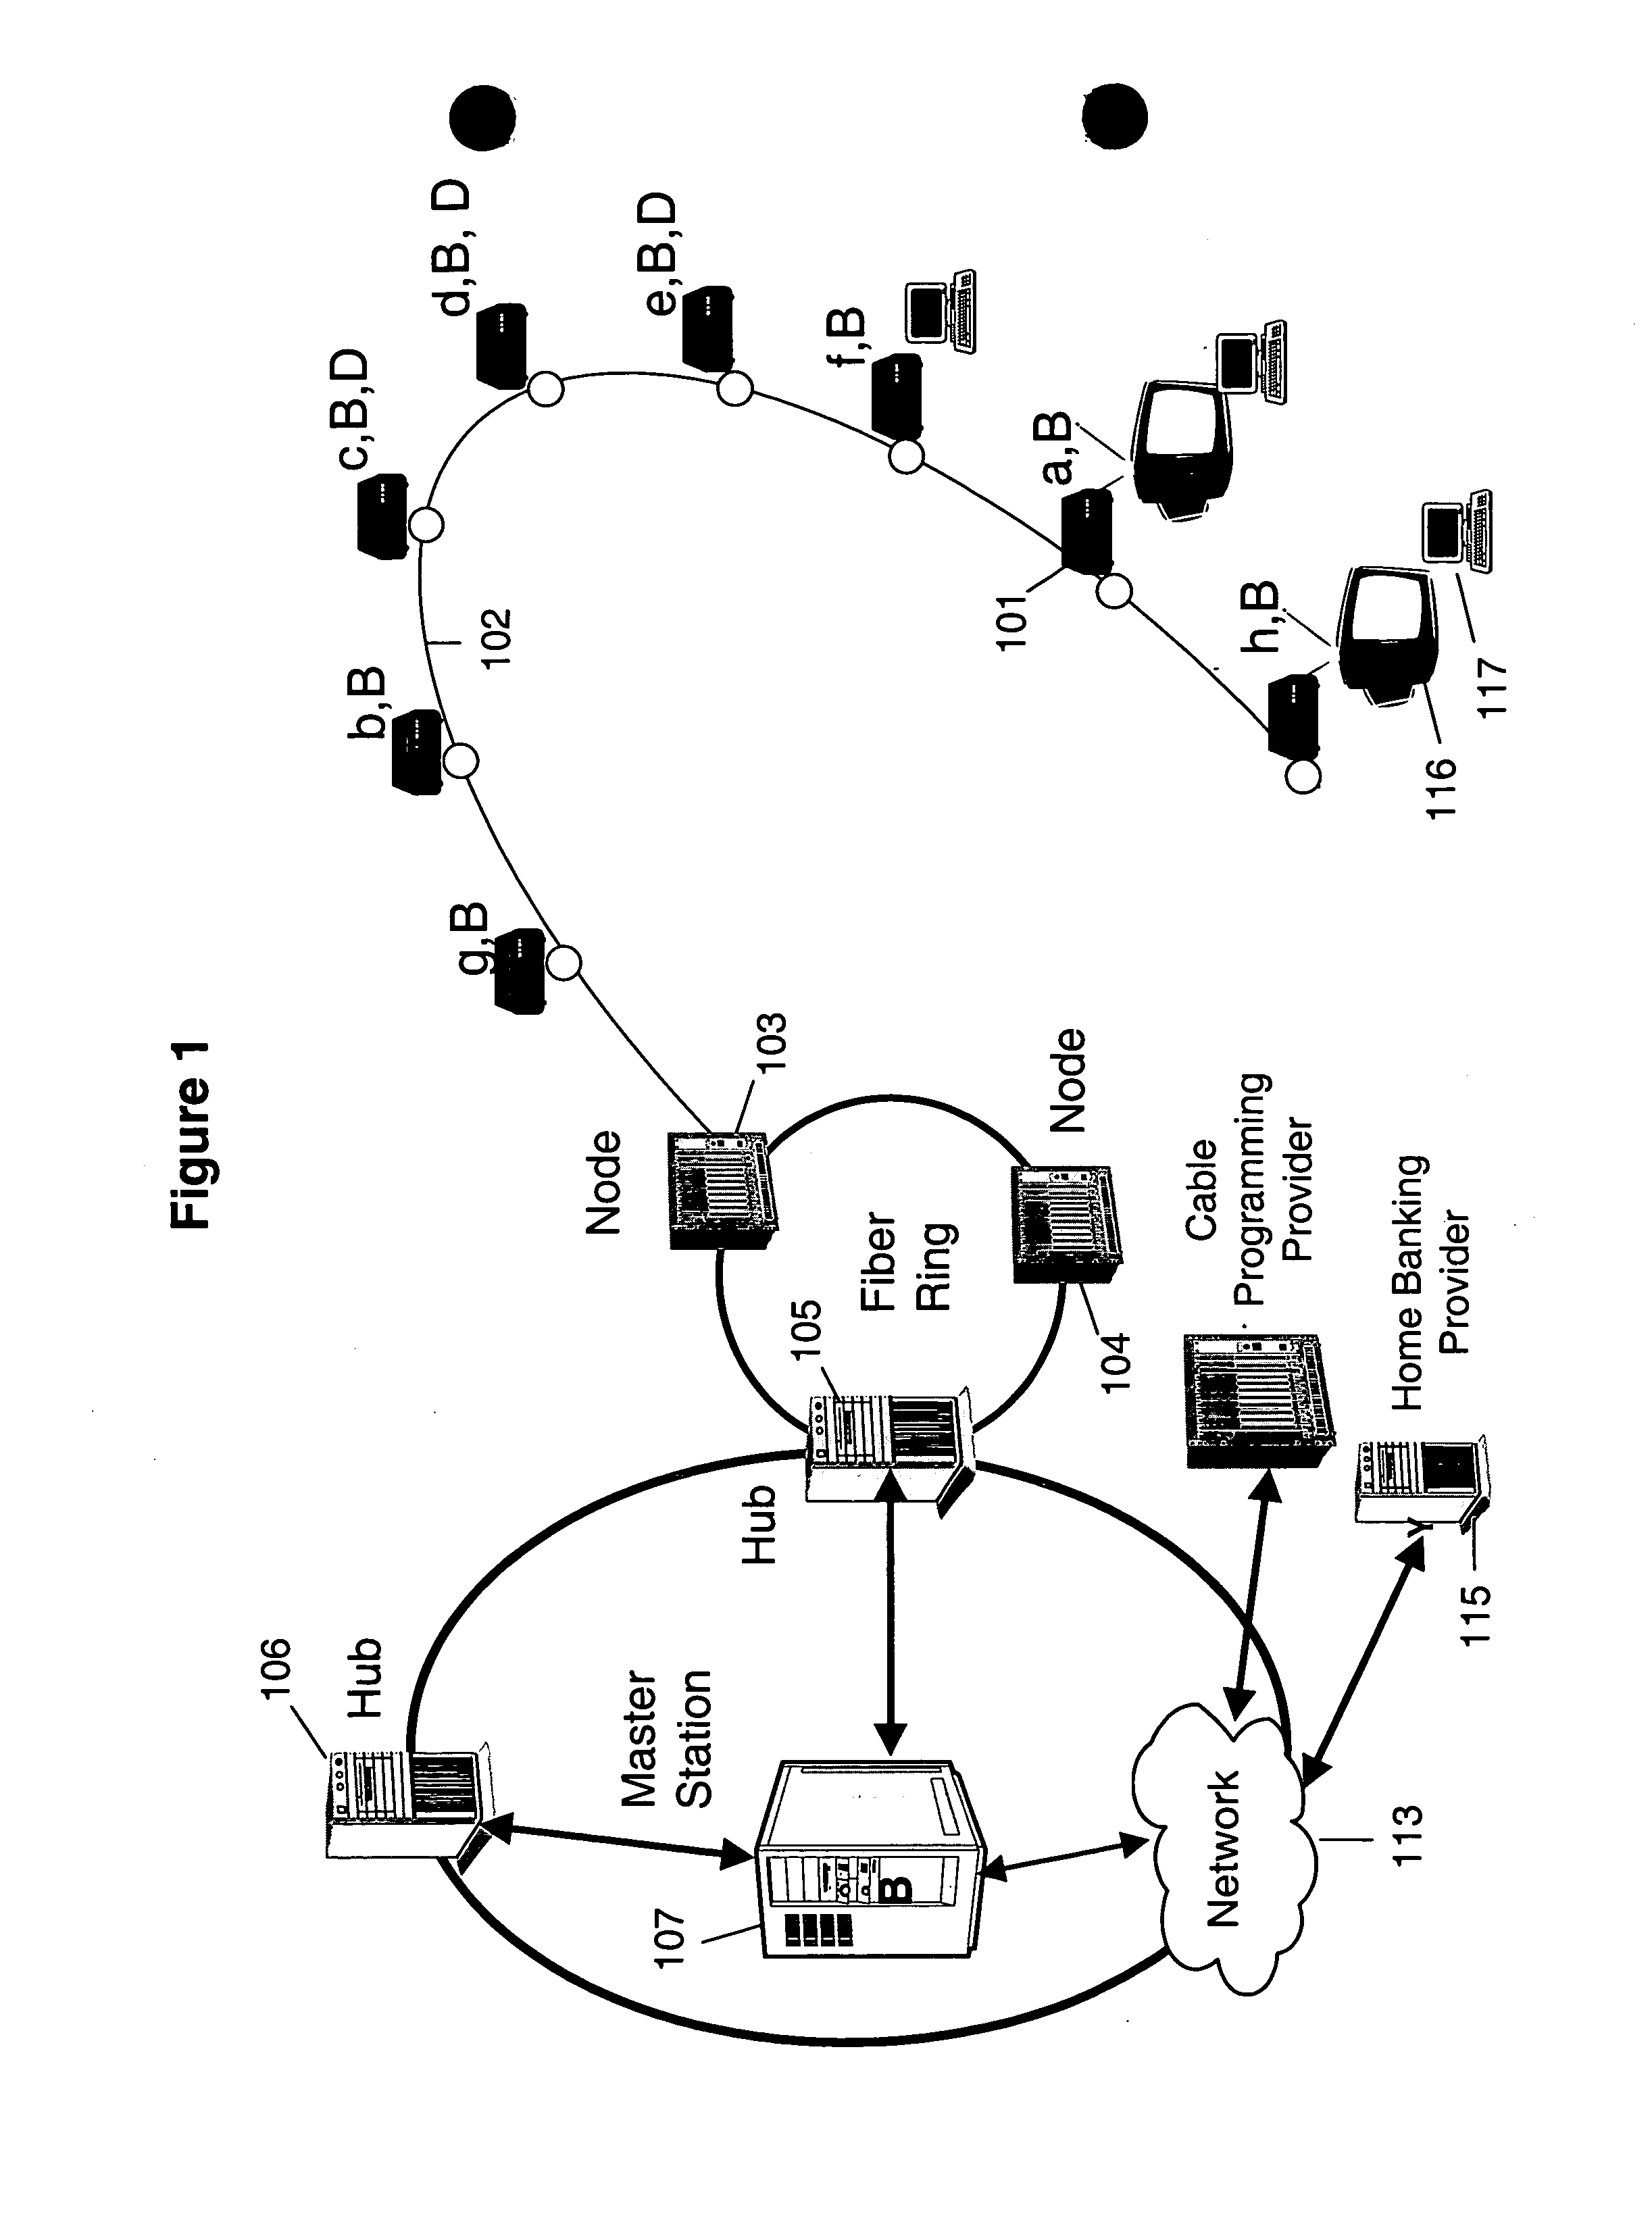 Cryptographic communications using in situ generated cryptographic keys for conditional access